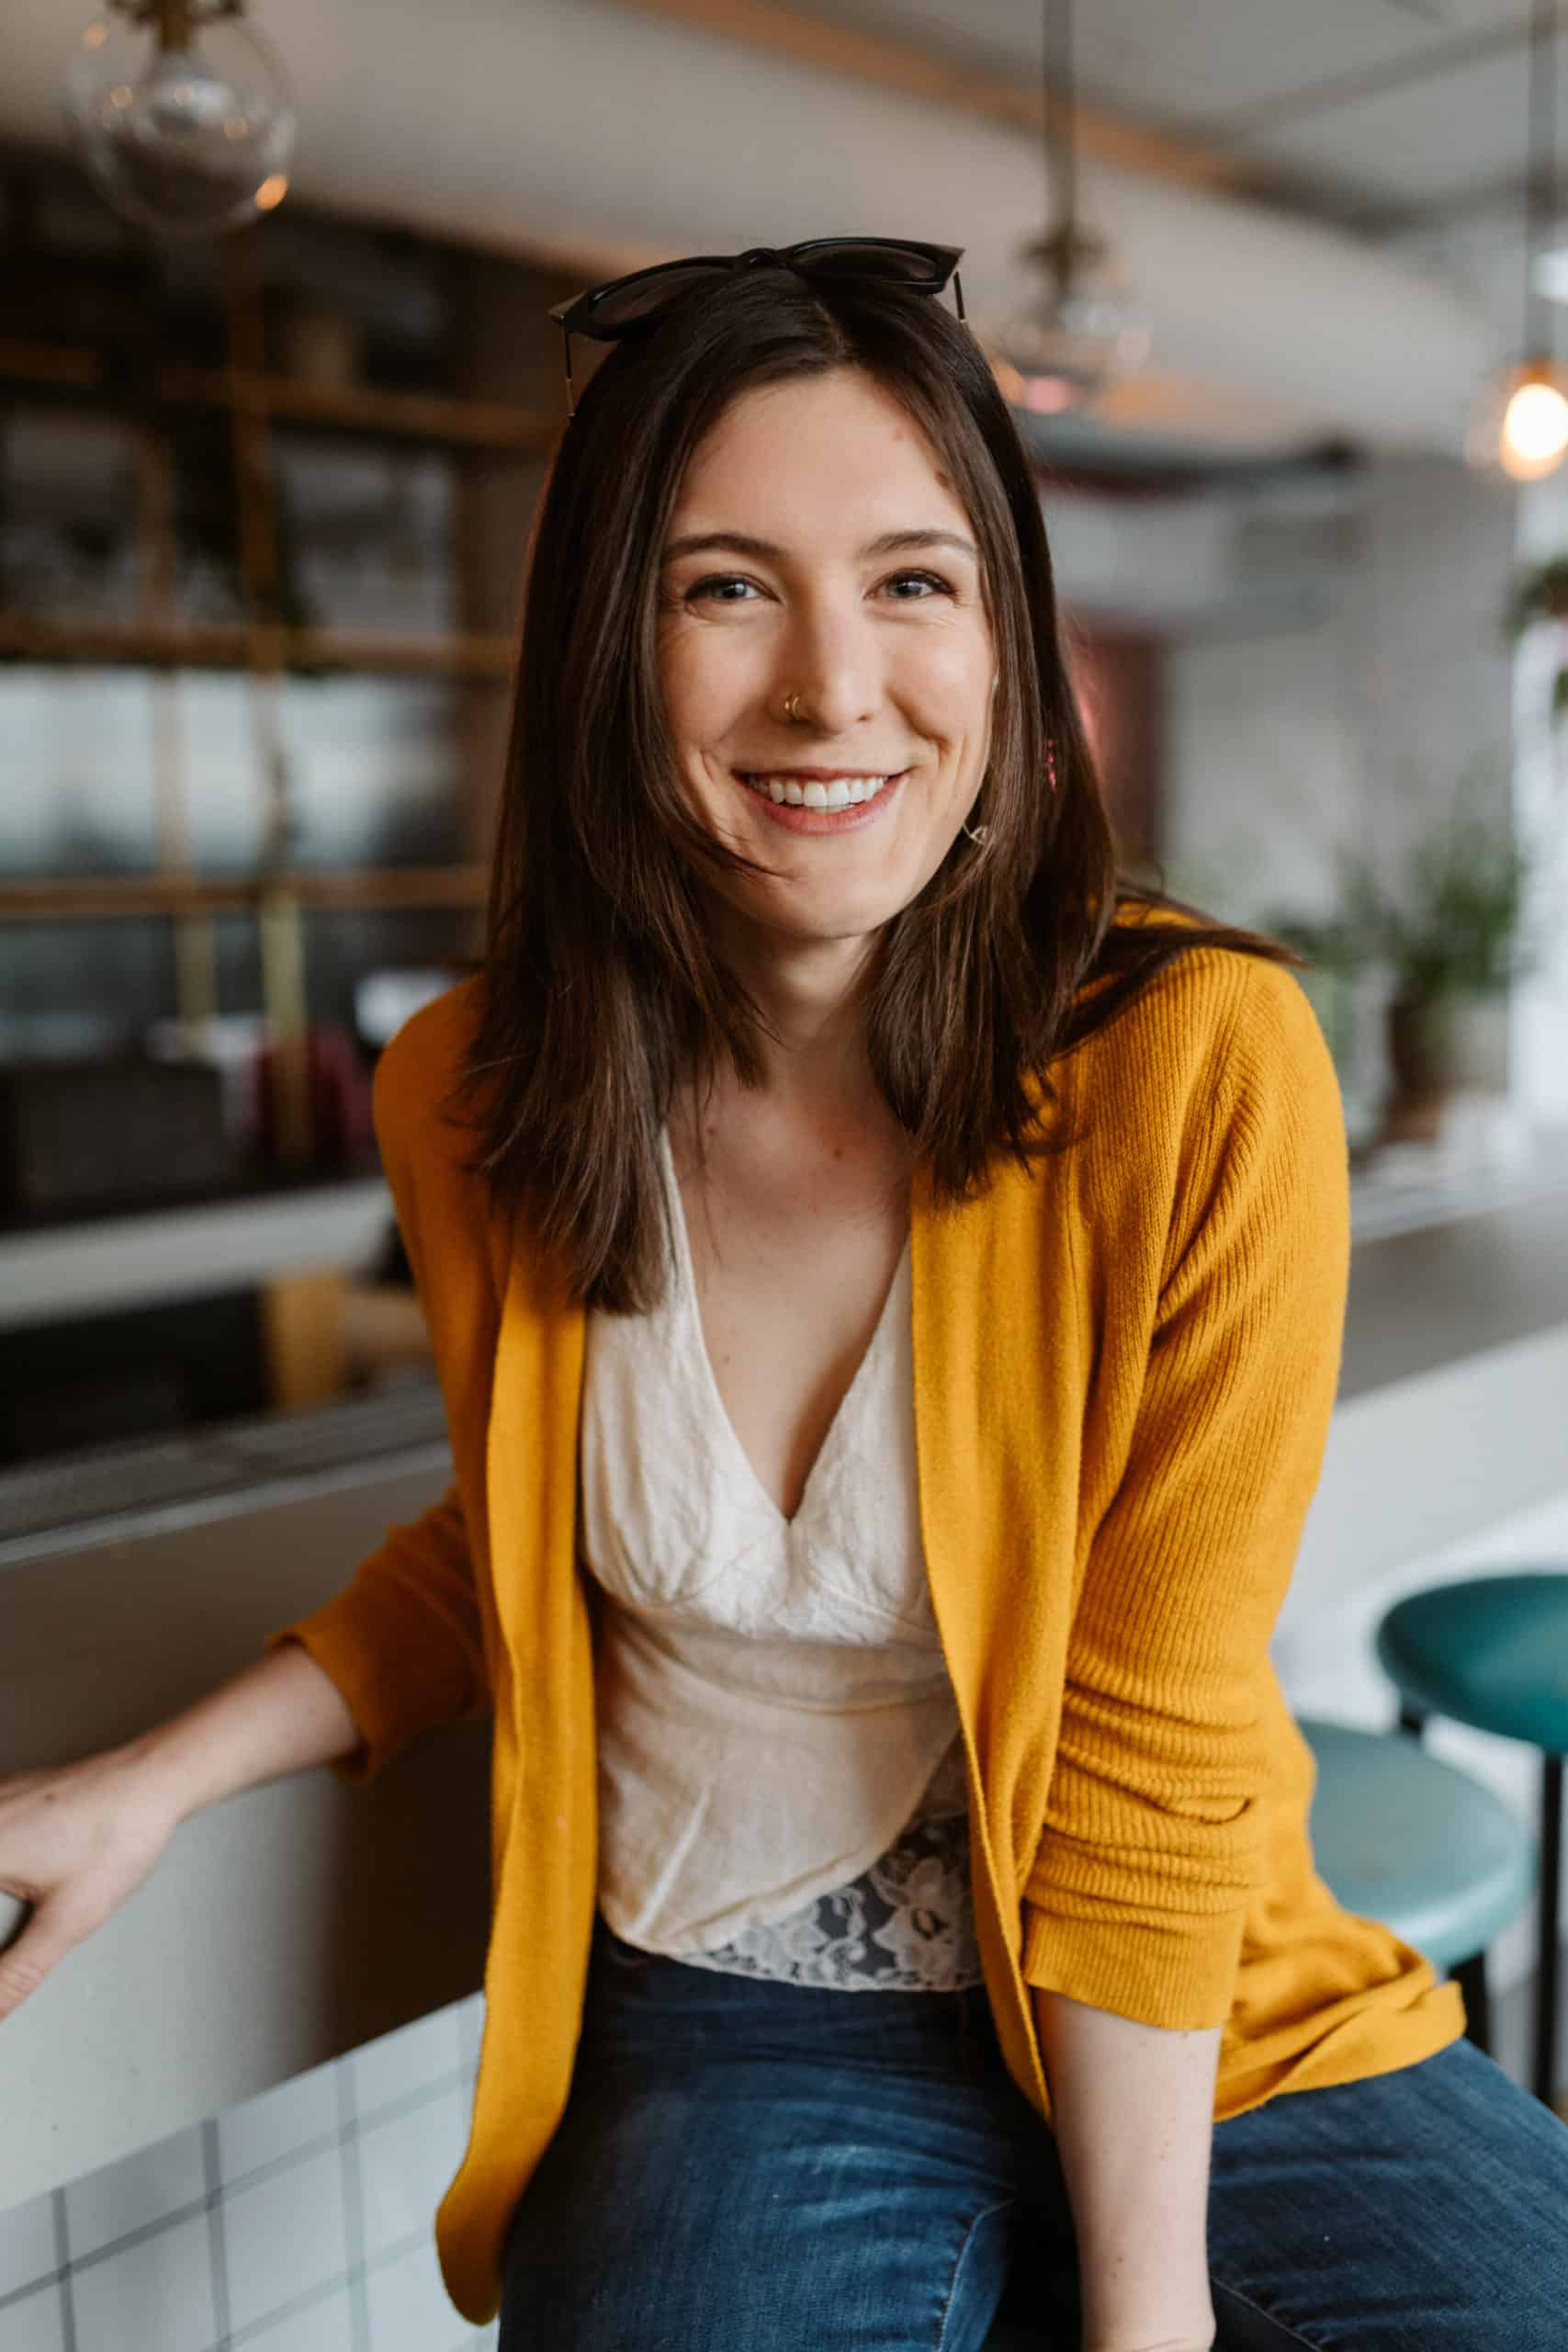 A smiling woman wearing jeans and a yellow cardigan sitting at a bar, showcasing her skills as a WordPress designer.